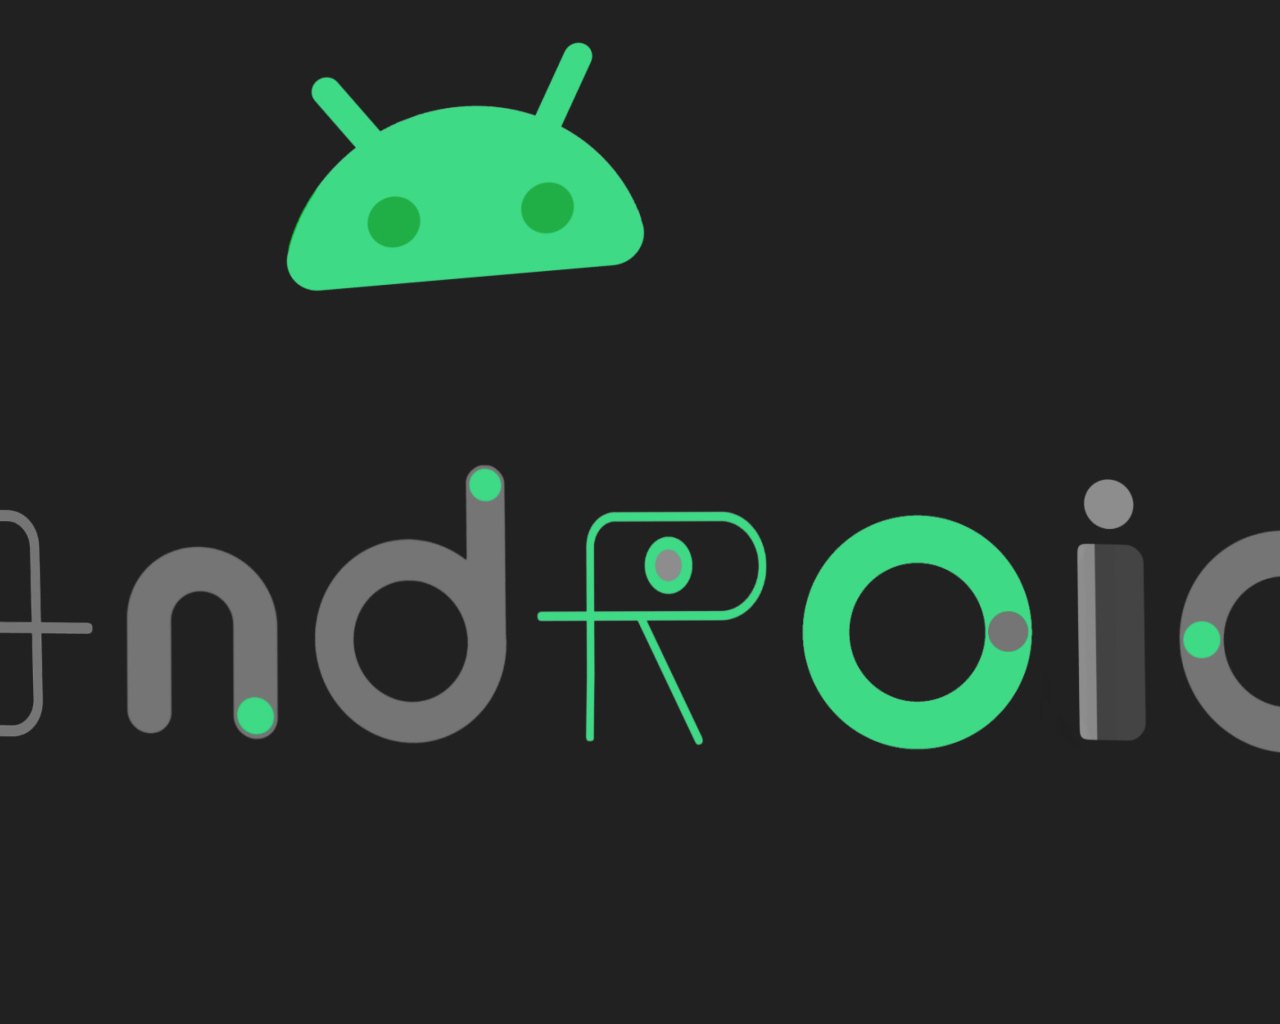 Android lettering on gray background